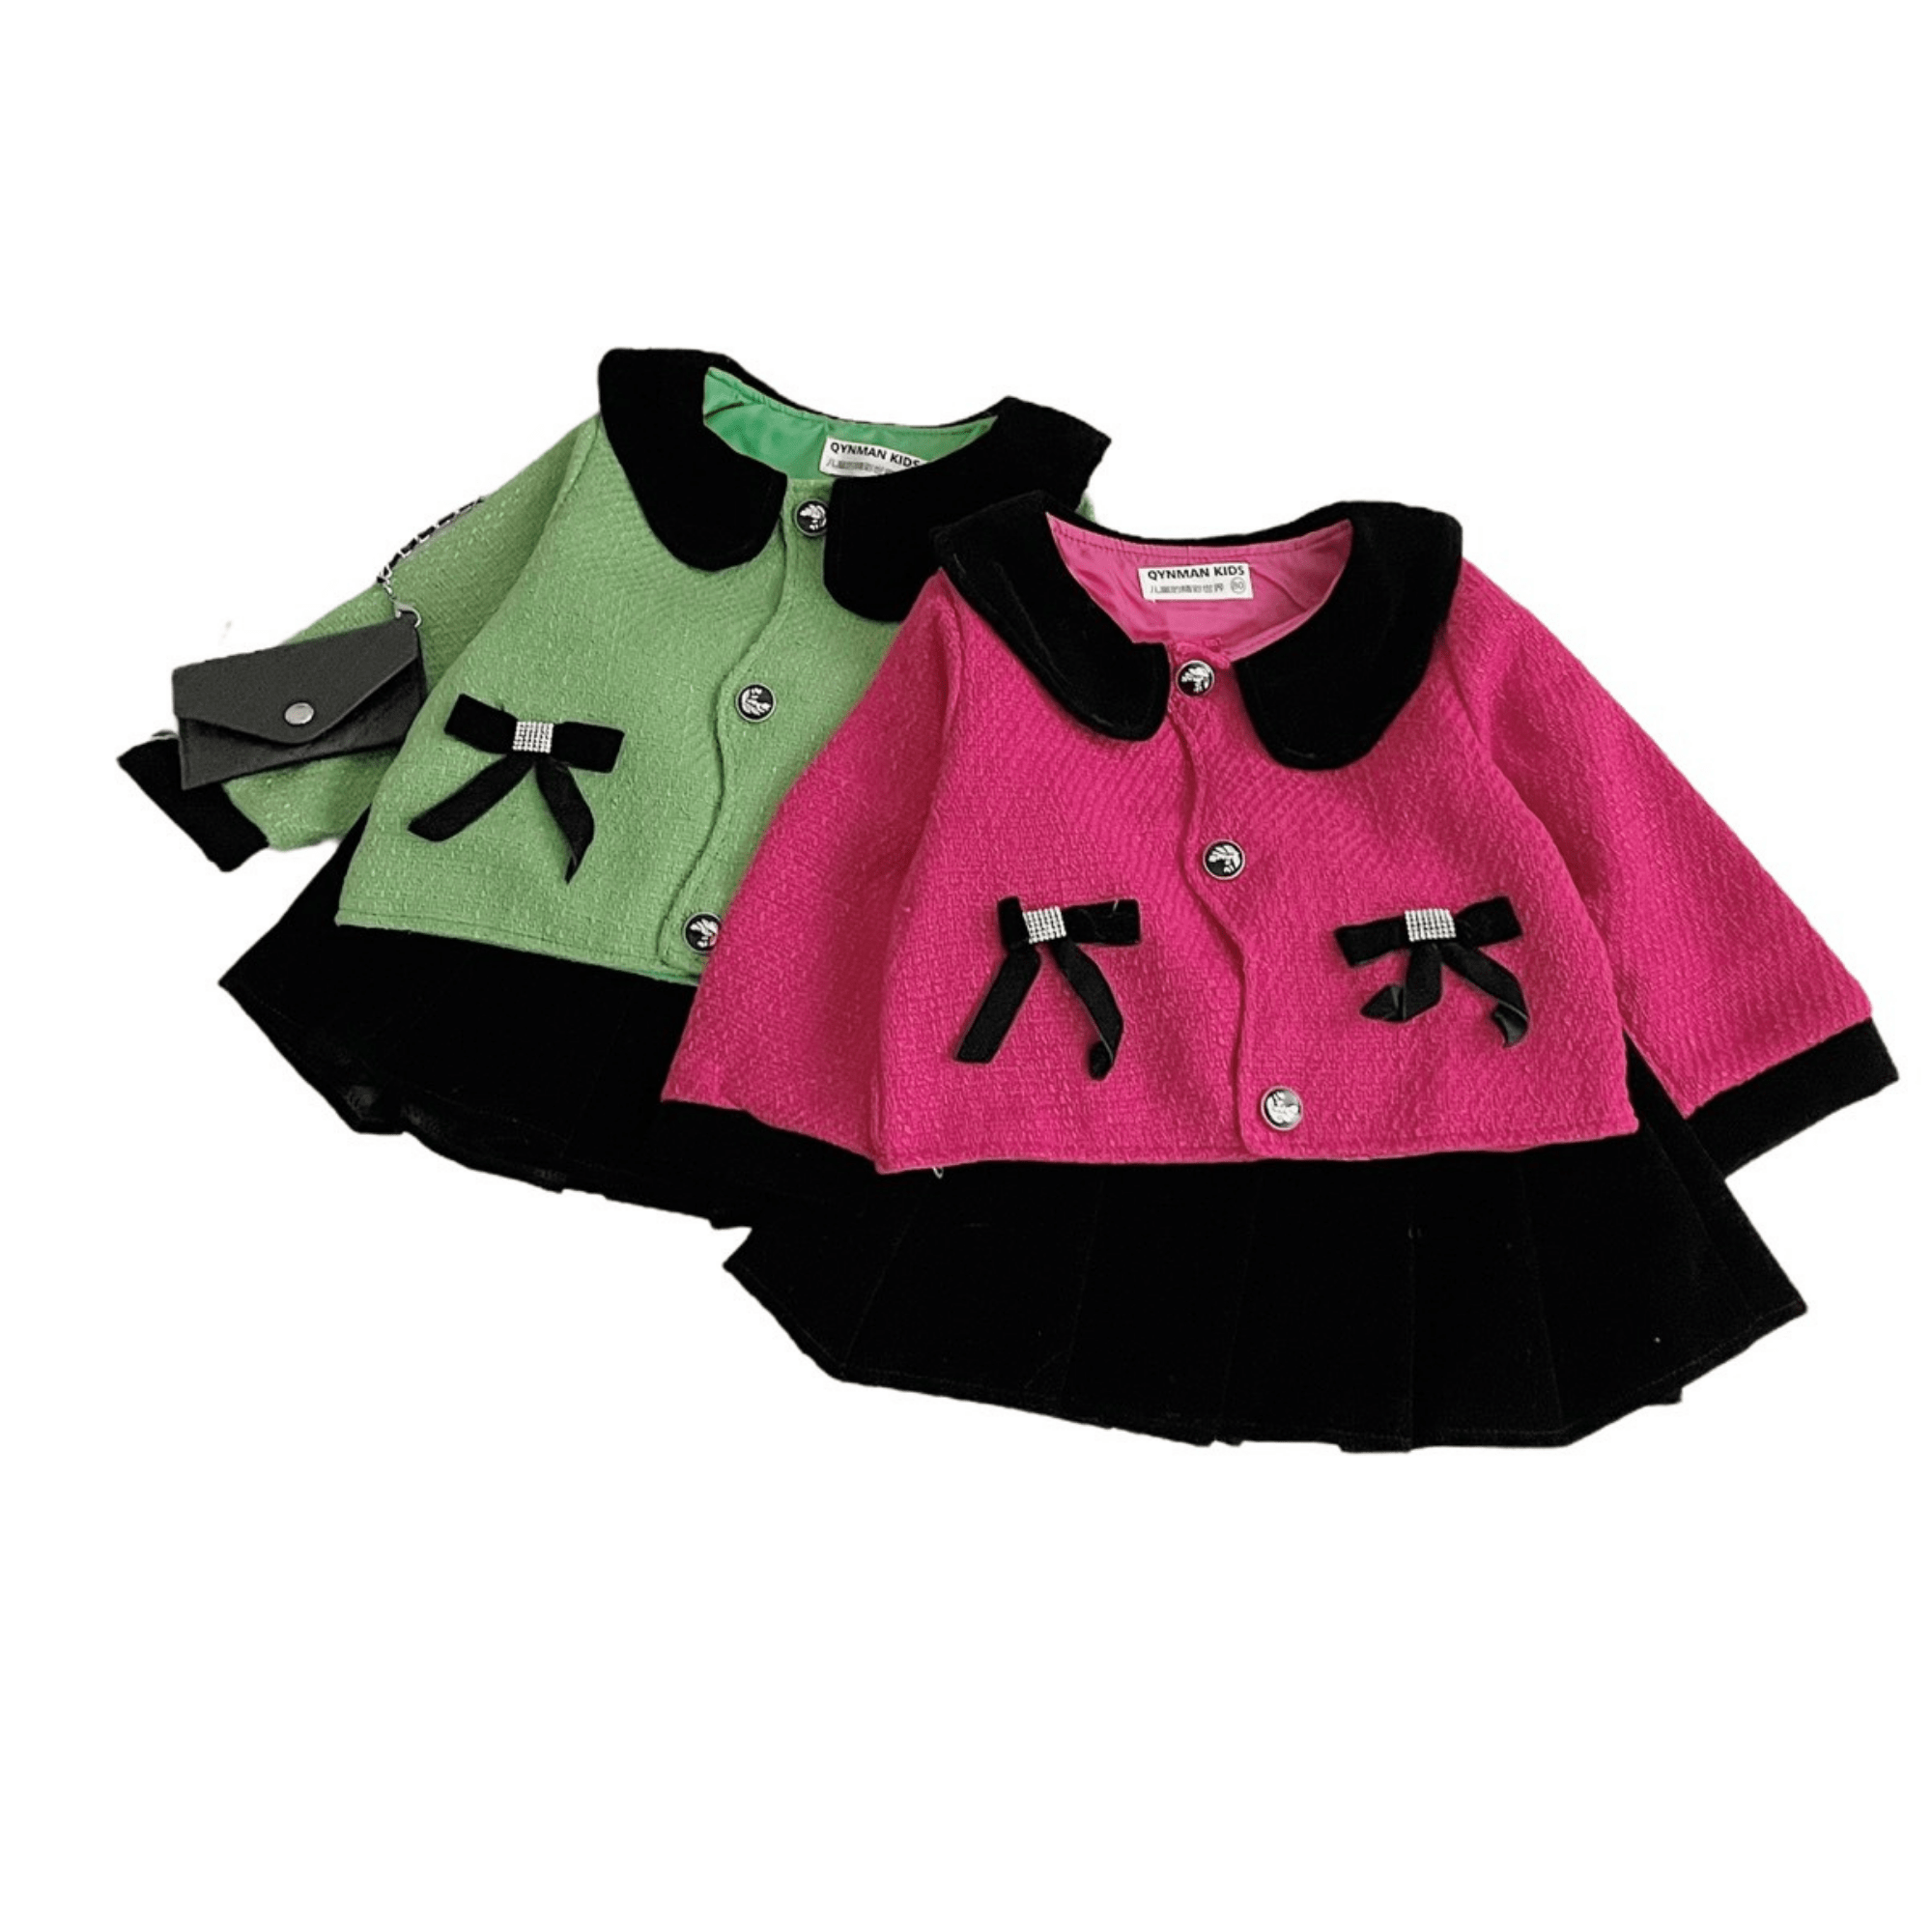 Winter Clothes For Kids Reasonable Price 100% Wool Dresses Casual Each One In Opp Bag Vietnam Manufacturer 1